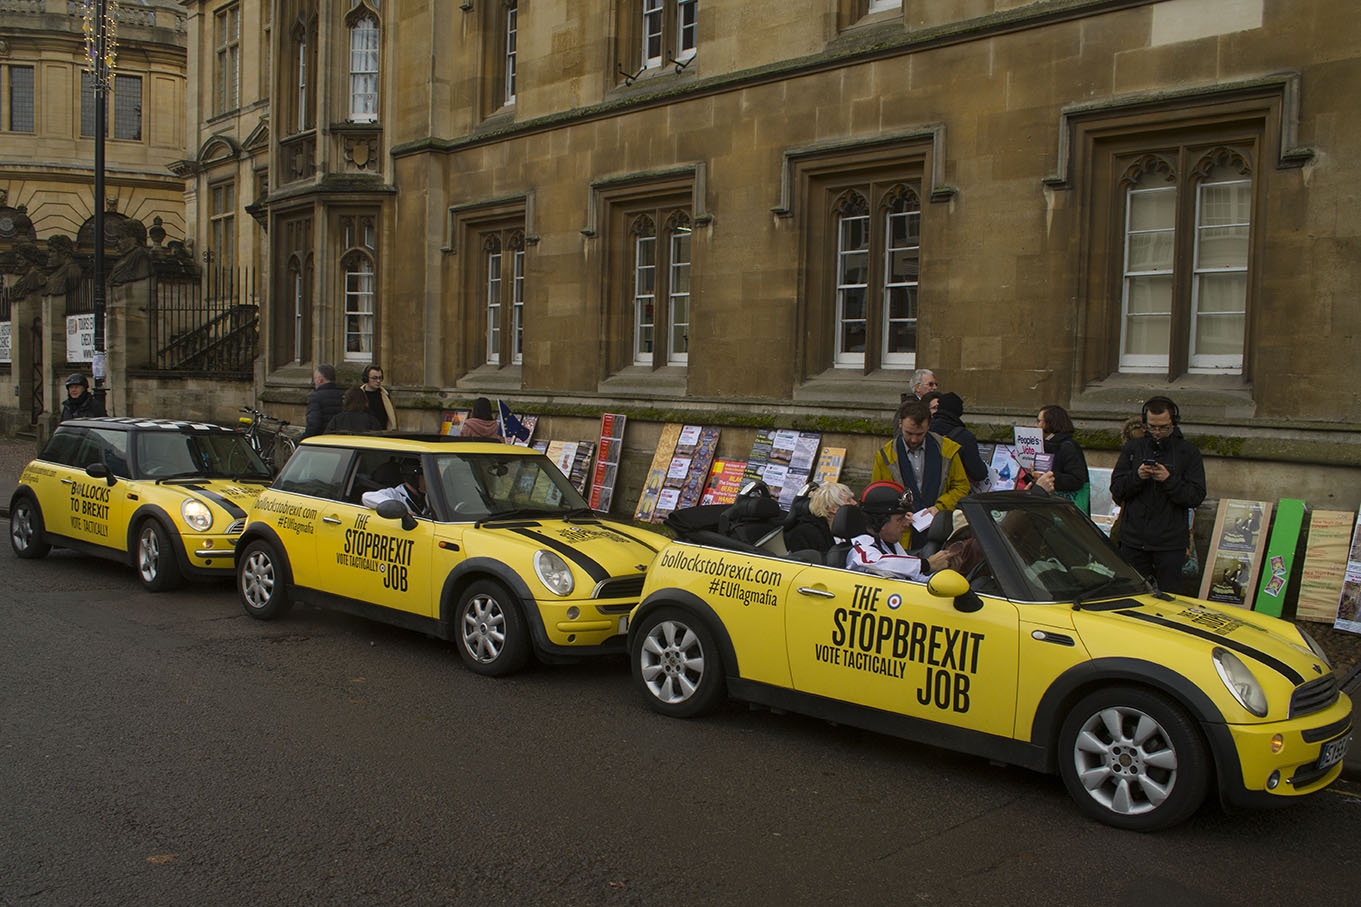 Oxford, UK - 06 Dec 2019 - EU Flag Mafia minis visit Oxford (including the Cowley Mini Factory), to protest against Brexit and call for a tactical vote. EU Flag Mafia are an anti-brexit protest group.